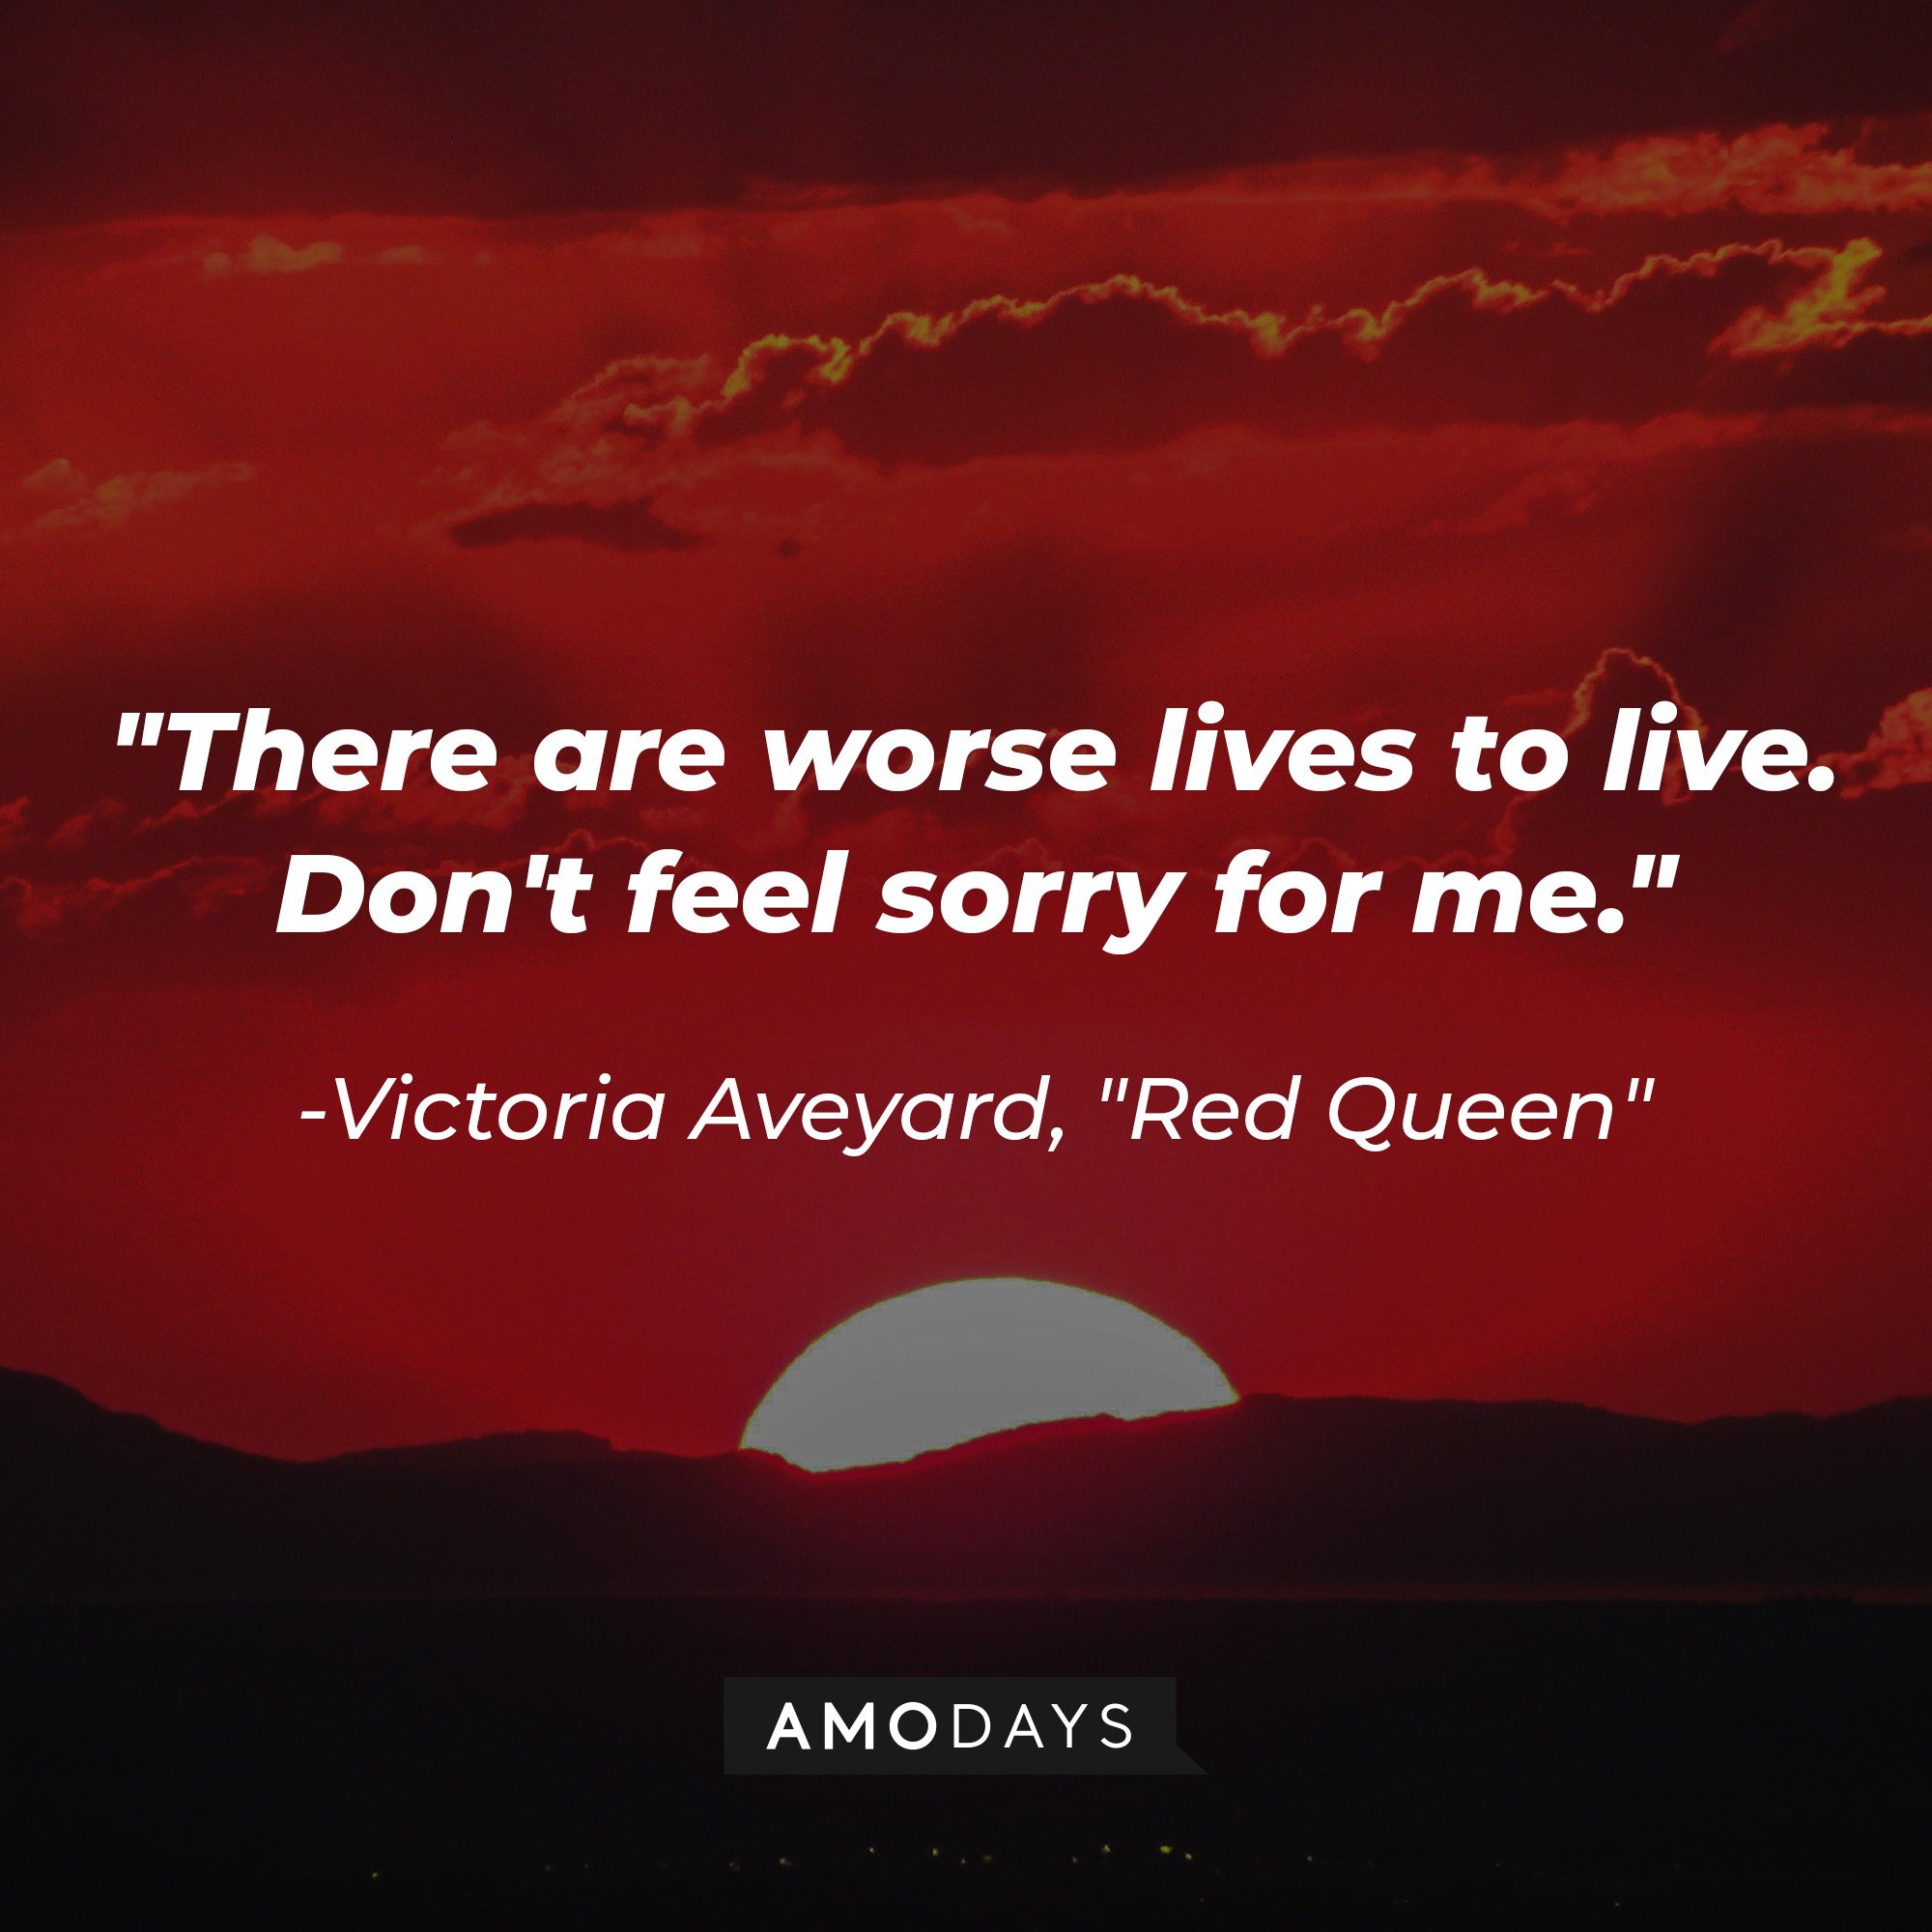  Victoria Aveyard’s quote in "Red Queen”: "There are worse lives to live. Don't feel sorry for me." |  Image: AmoDays